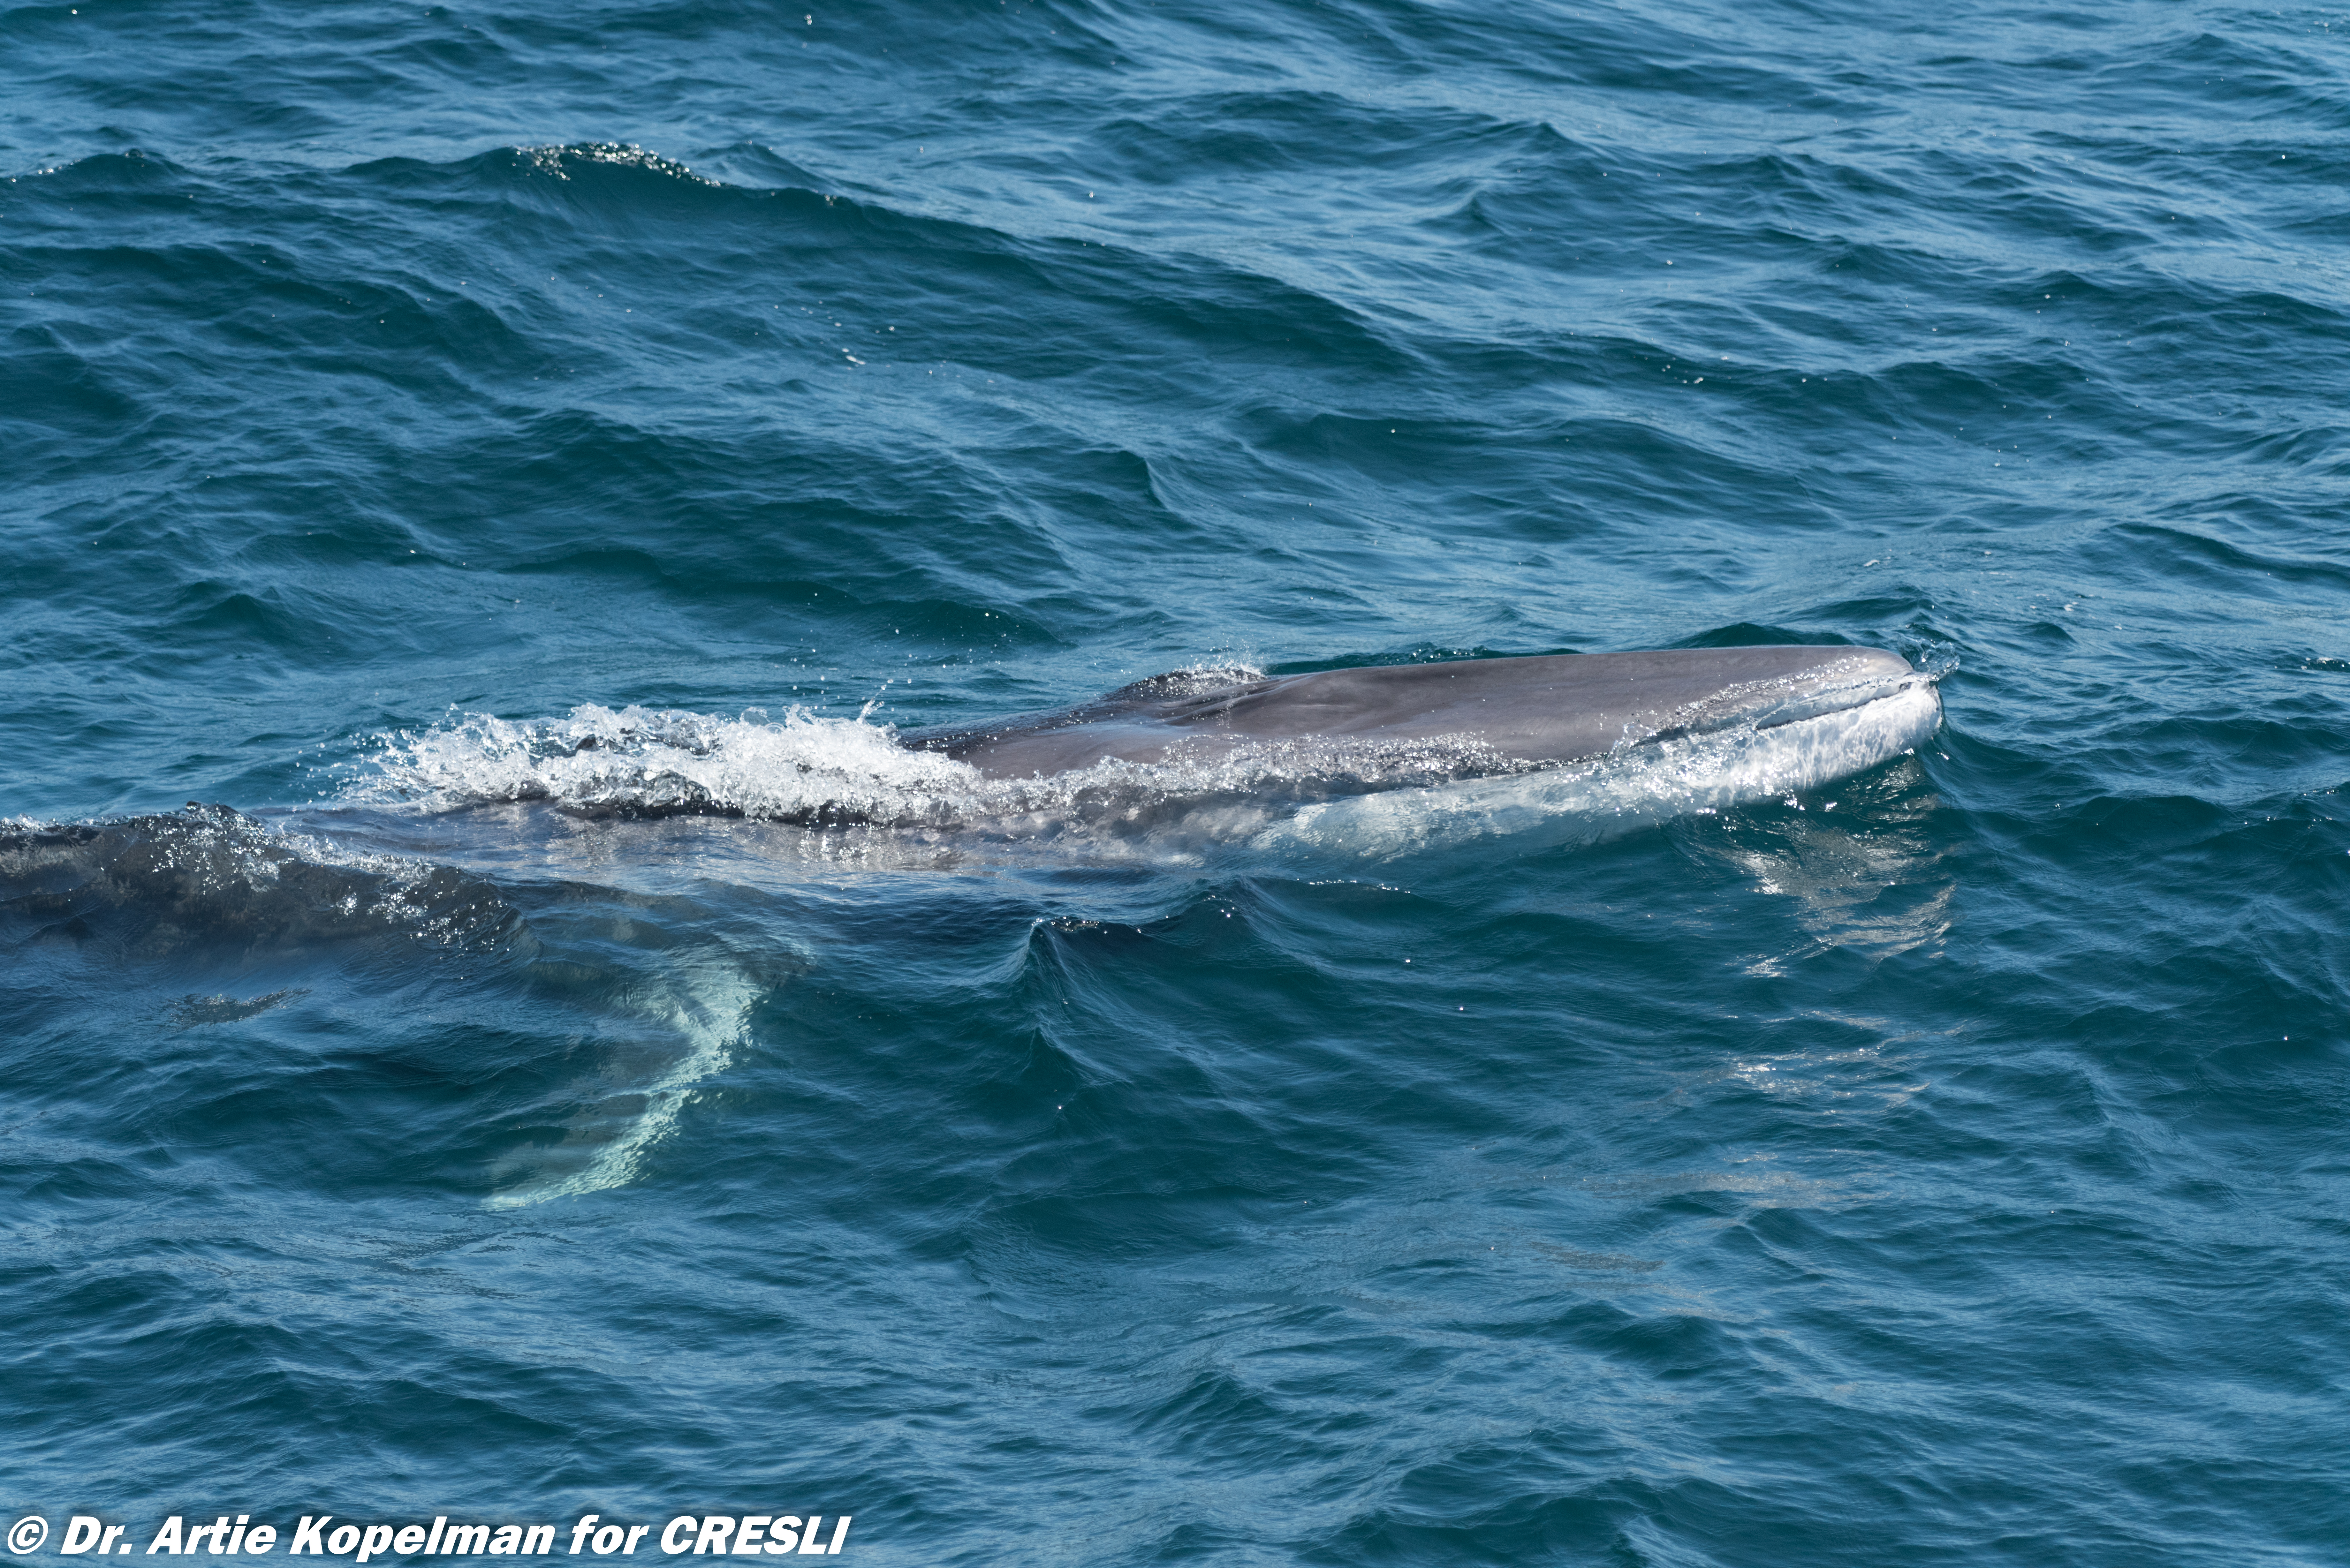 Fin whale calf showing its white lower jaw